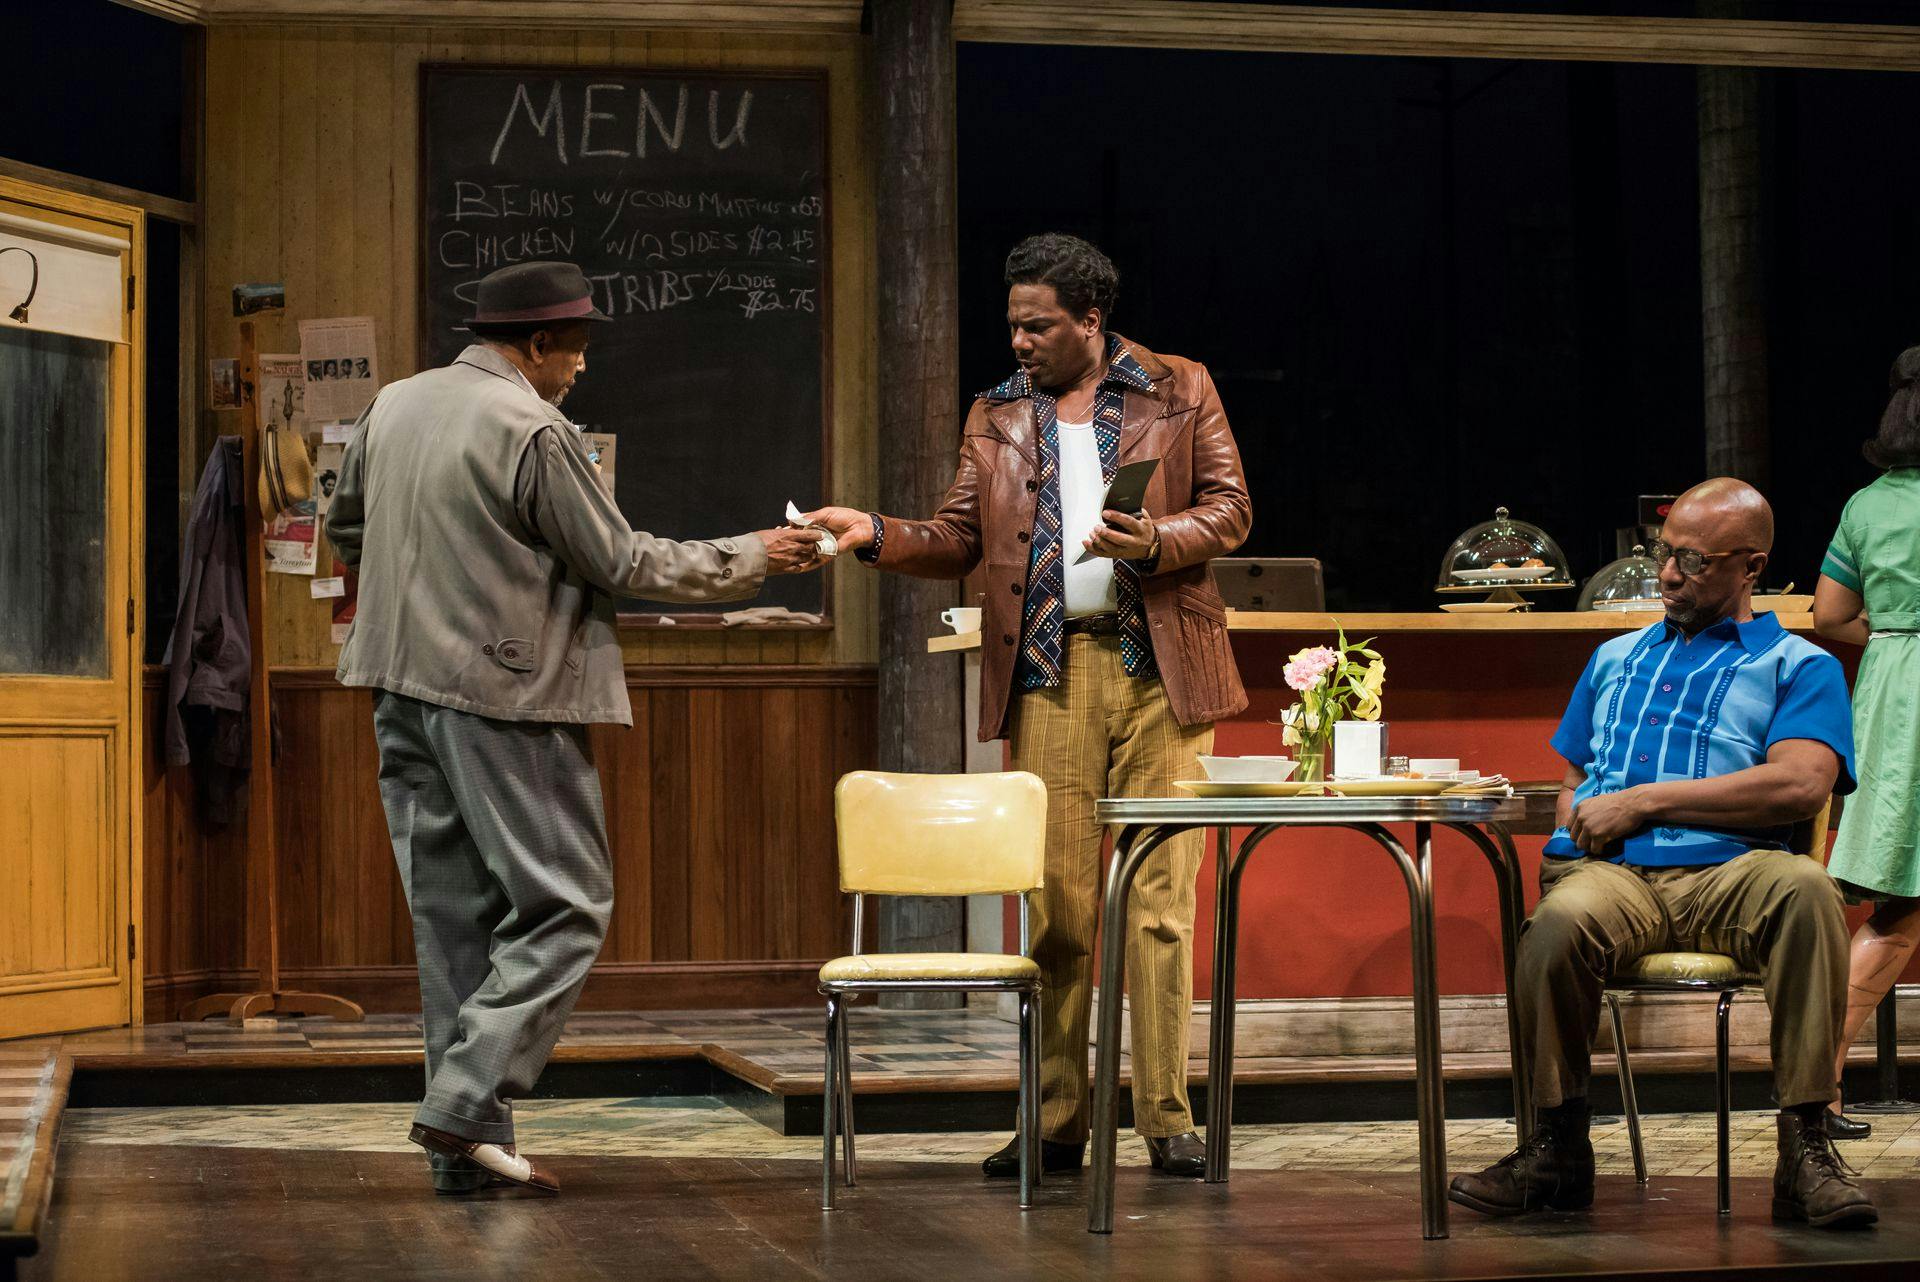 In a play on stage, one man hands another cash, while a third man sits at a table